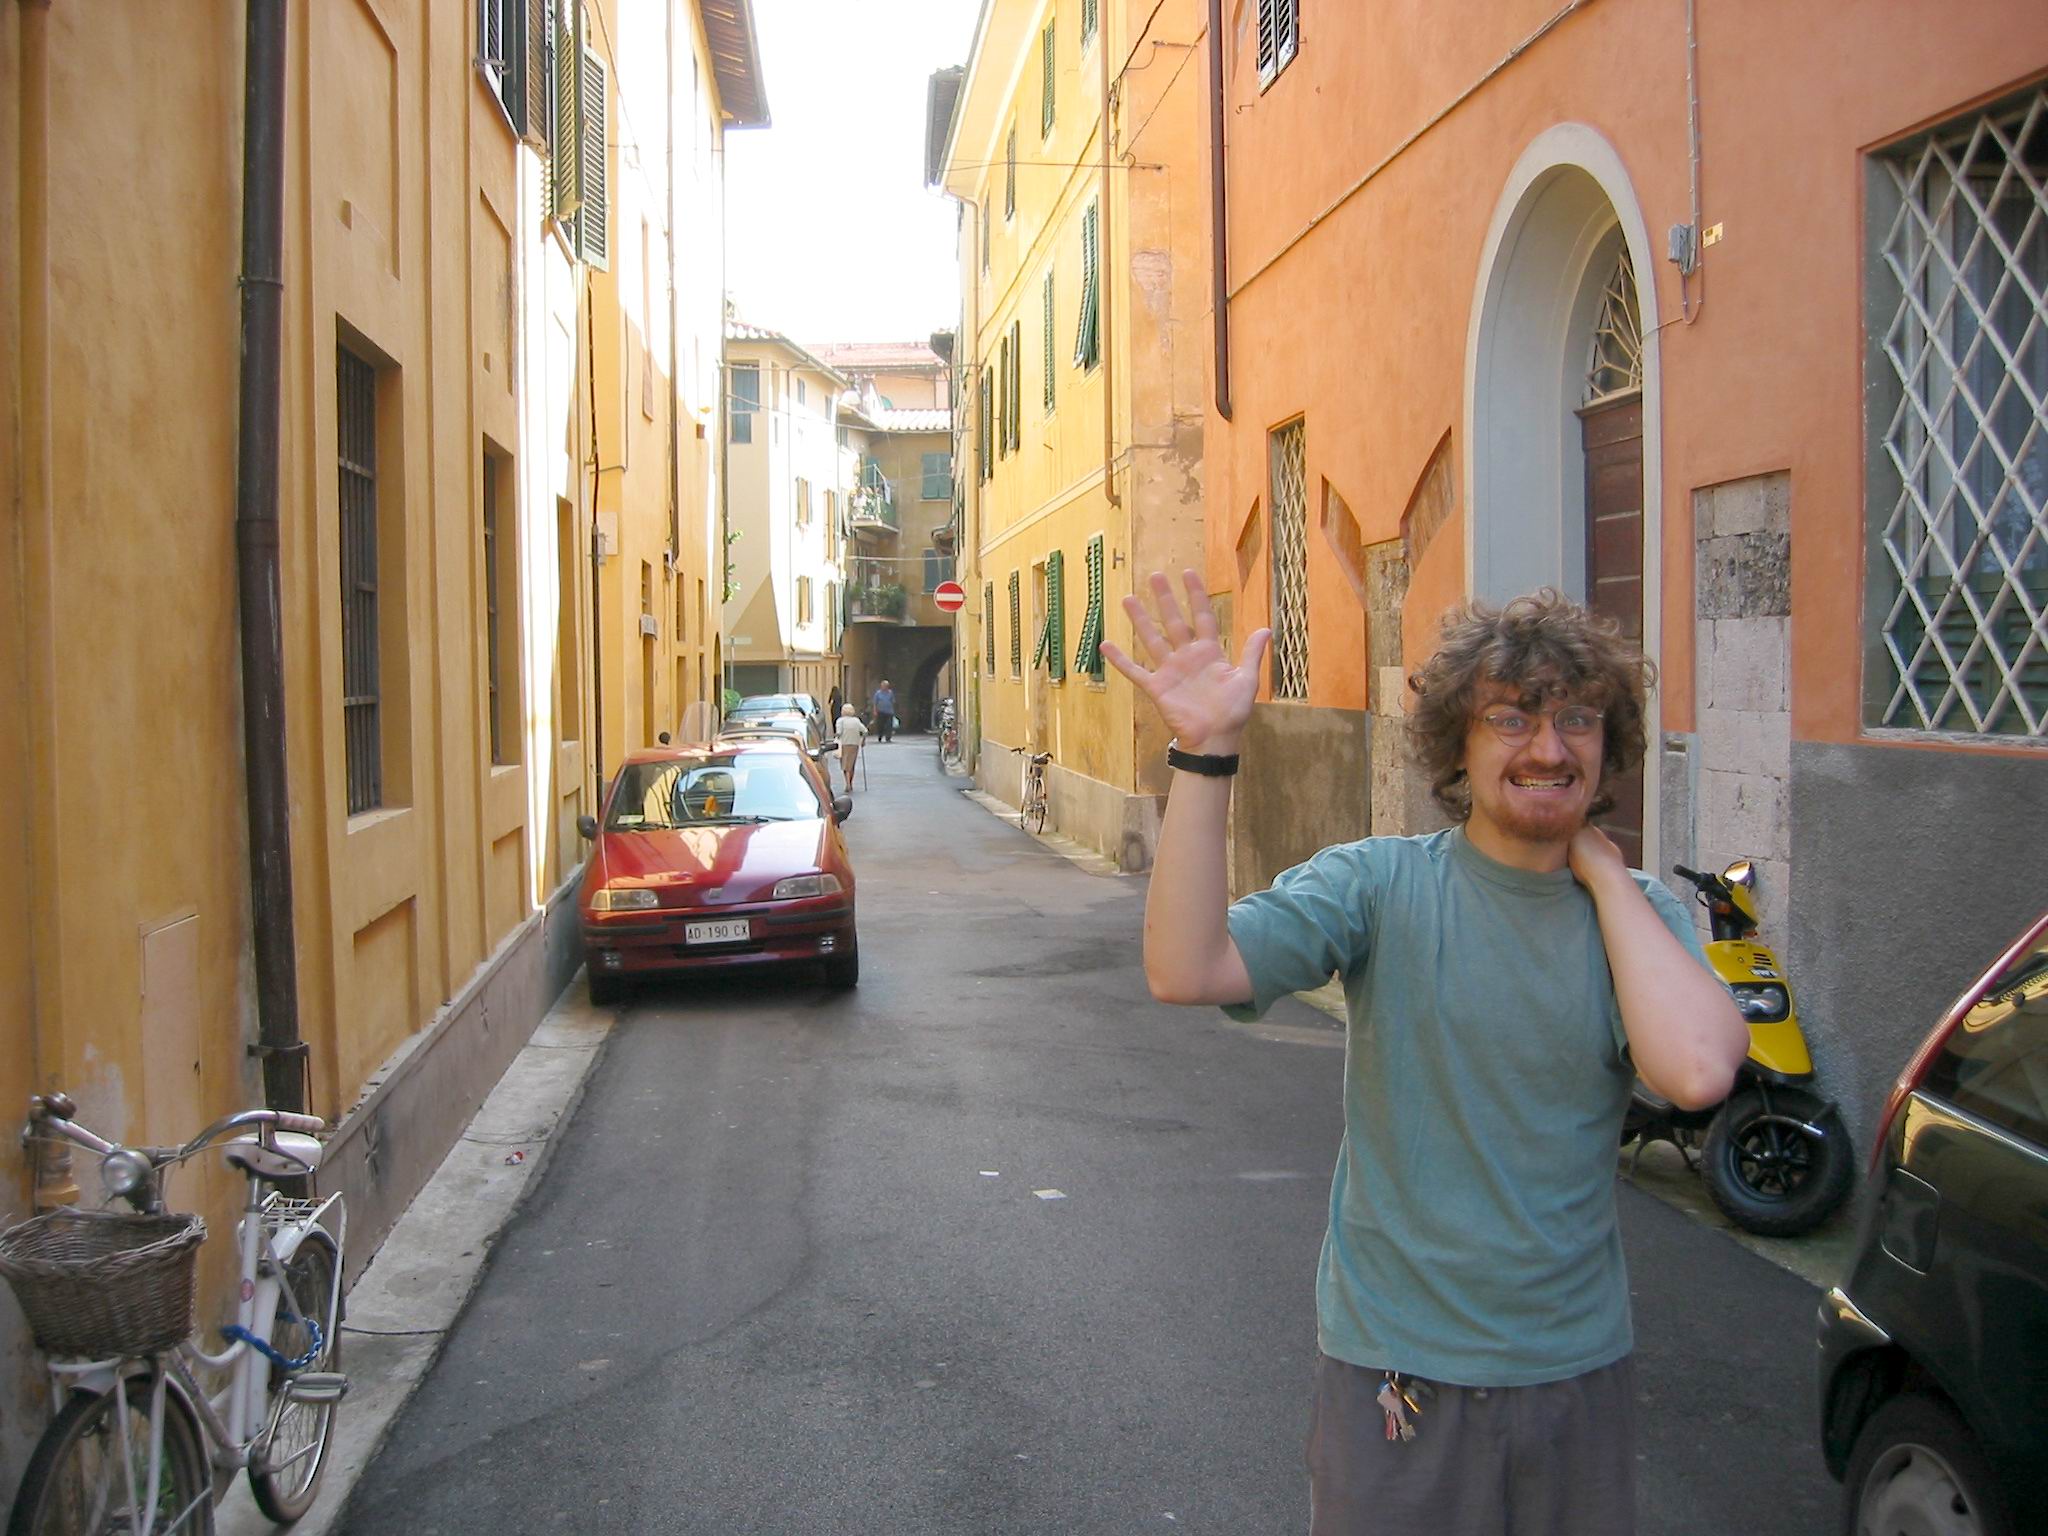 And now, Marco! In his home in Pisa!